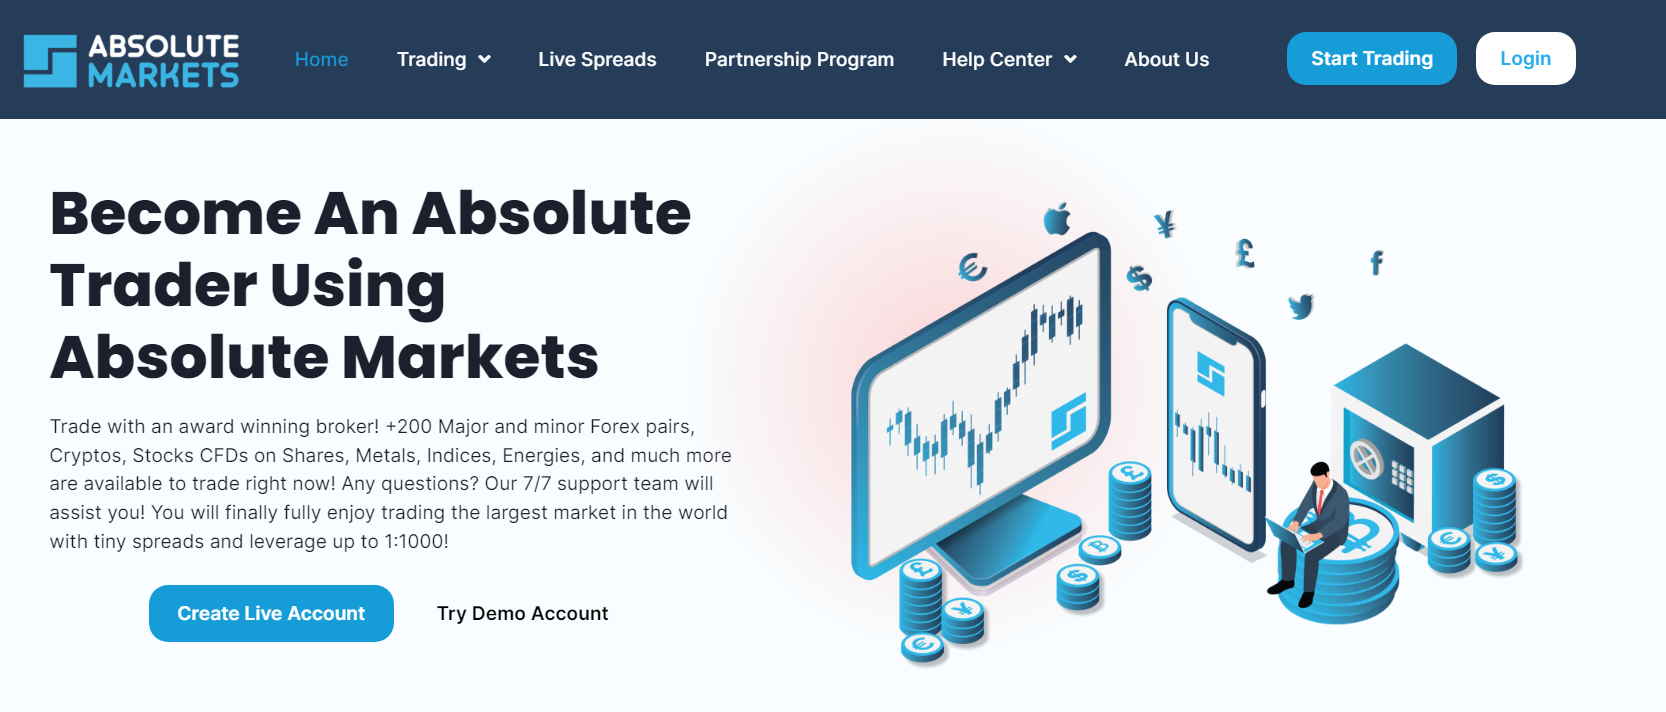 Absolute markets-homepage